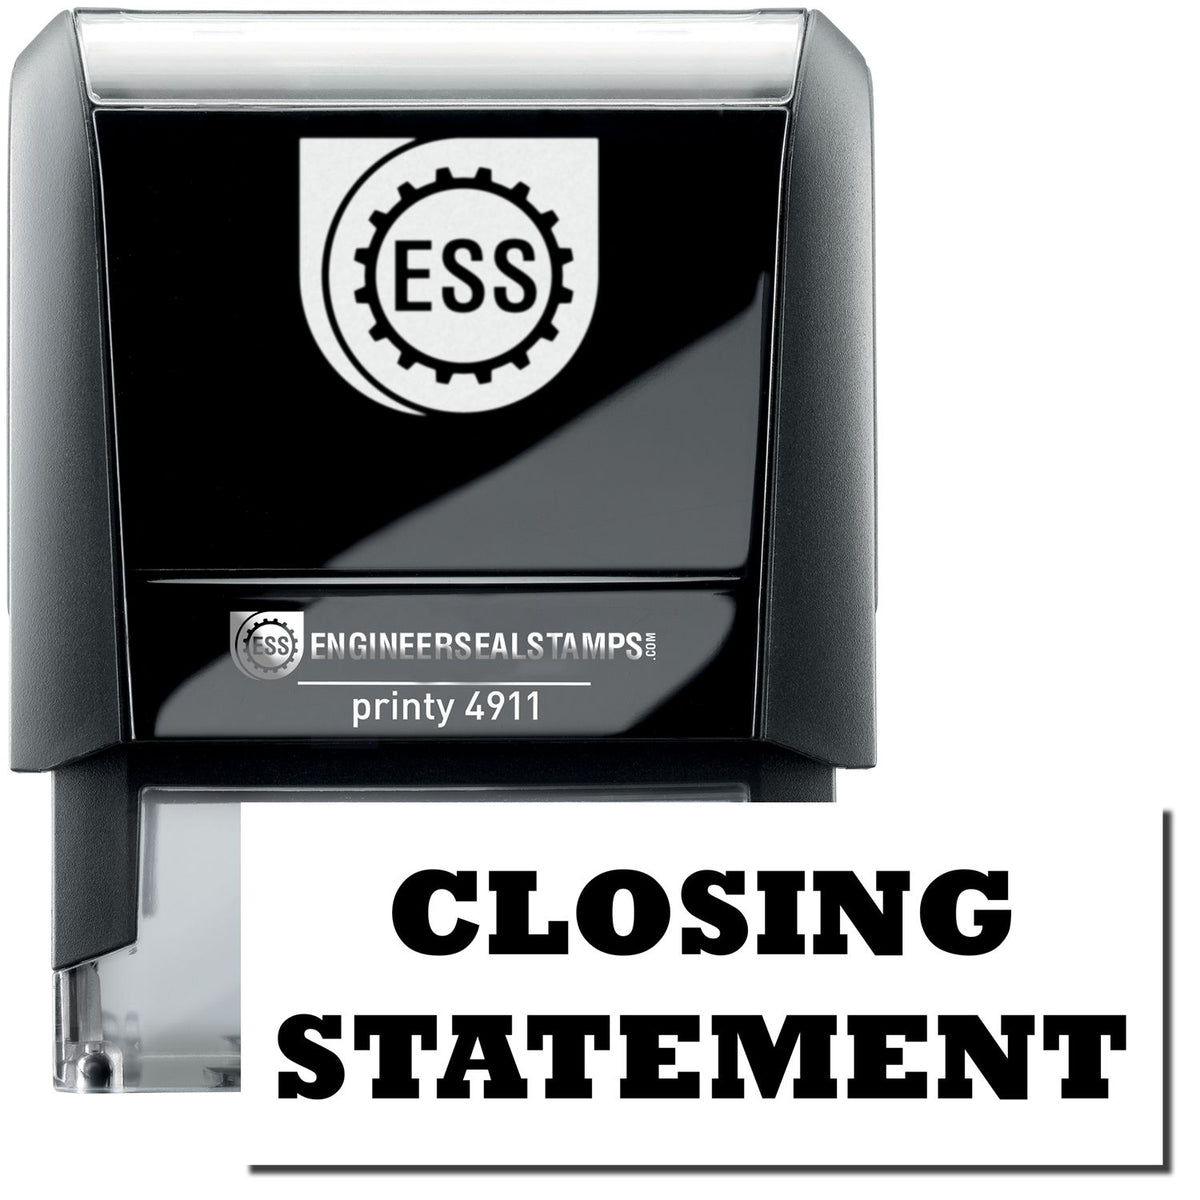 A self-inking stamp with a stamped image showing how the text &quot;CLOSING STATEMENT&quot; is displayed after stamping.